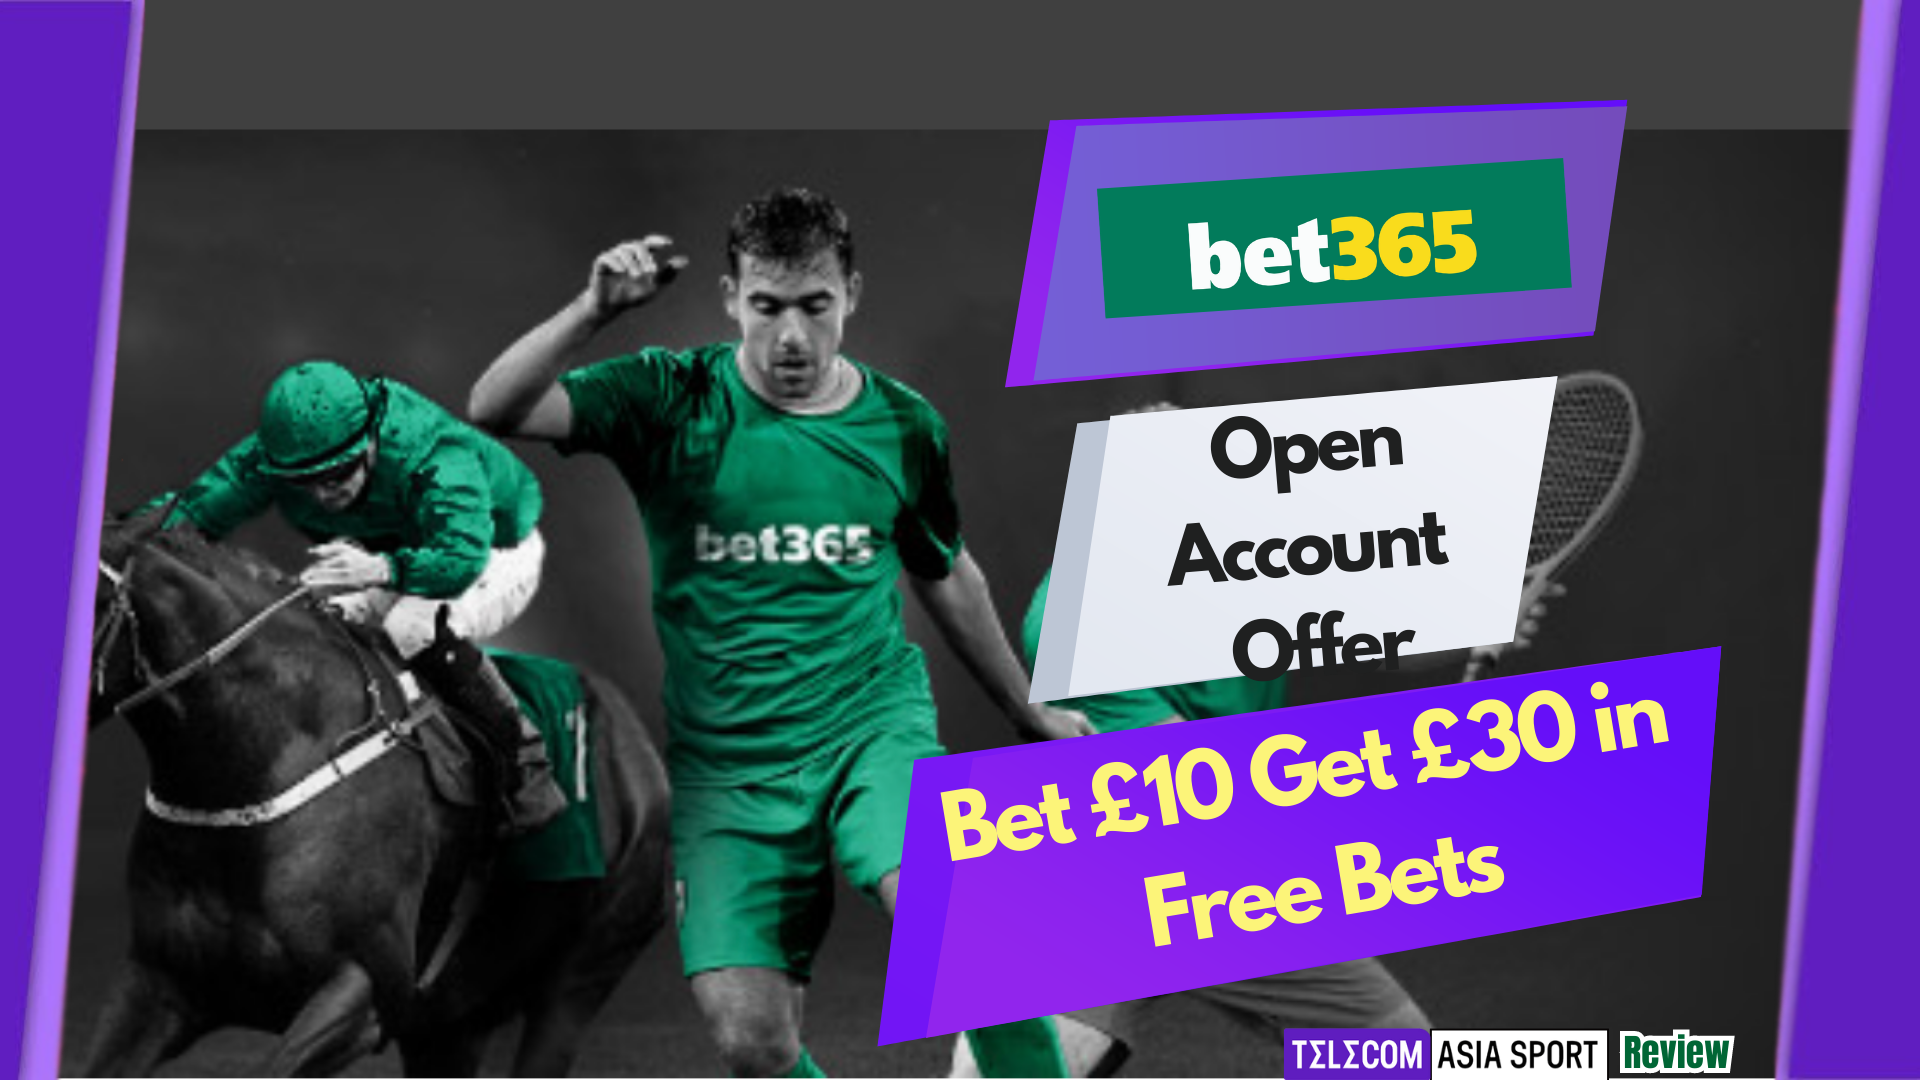 Bet365 Bet £10 Get £30 in Free Bets